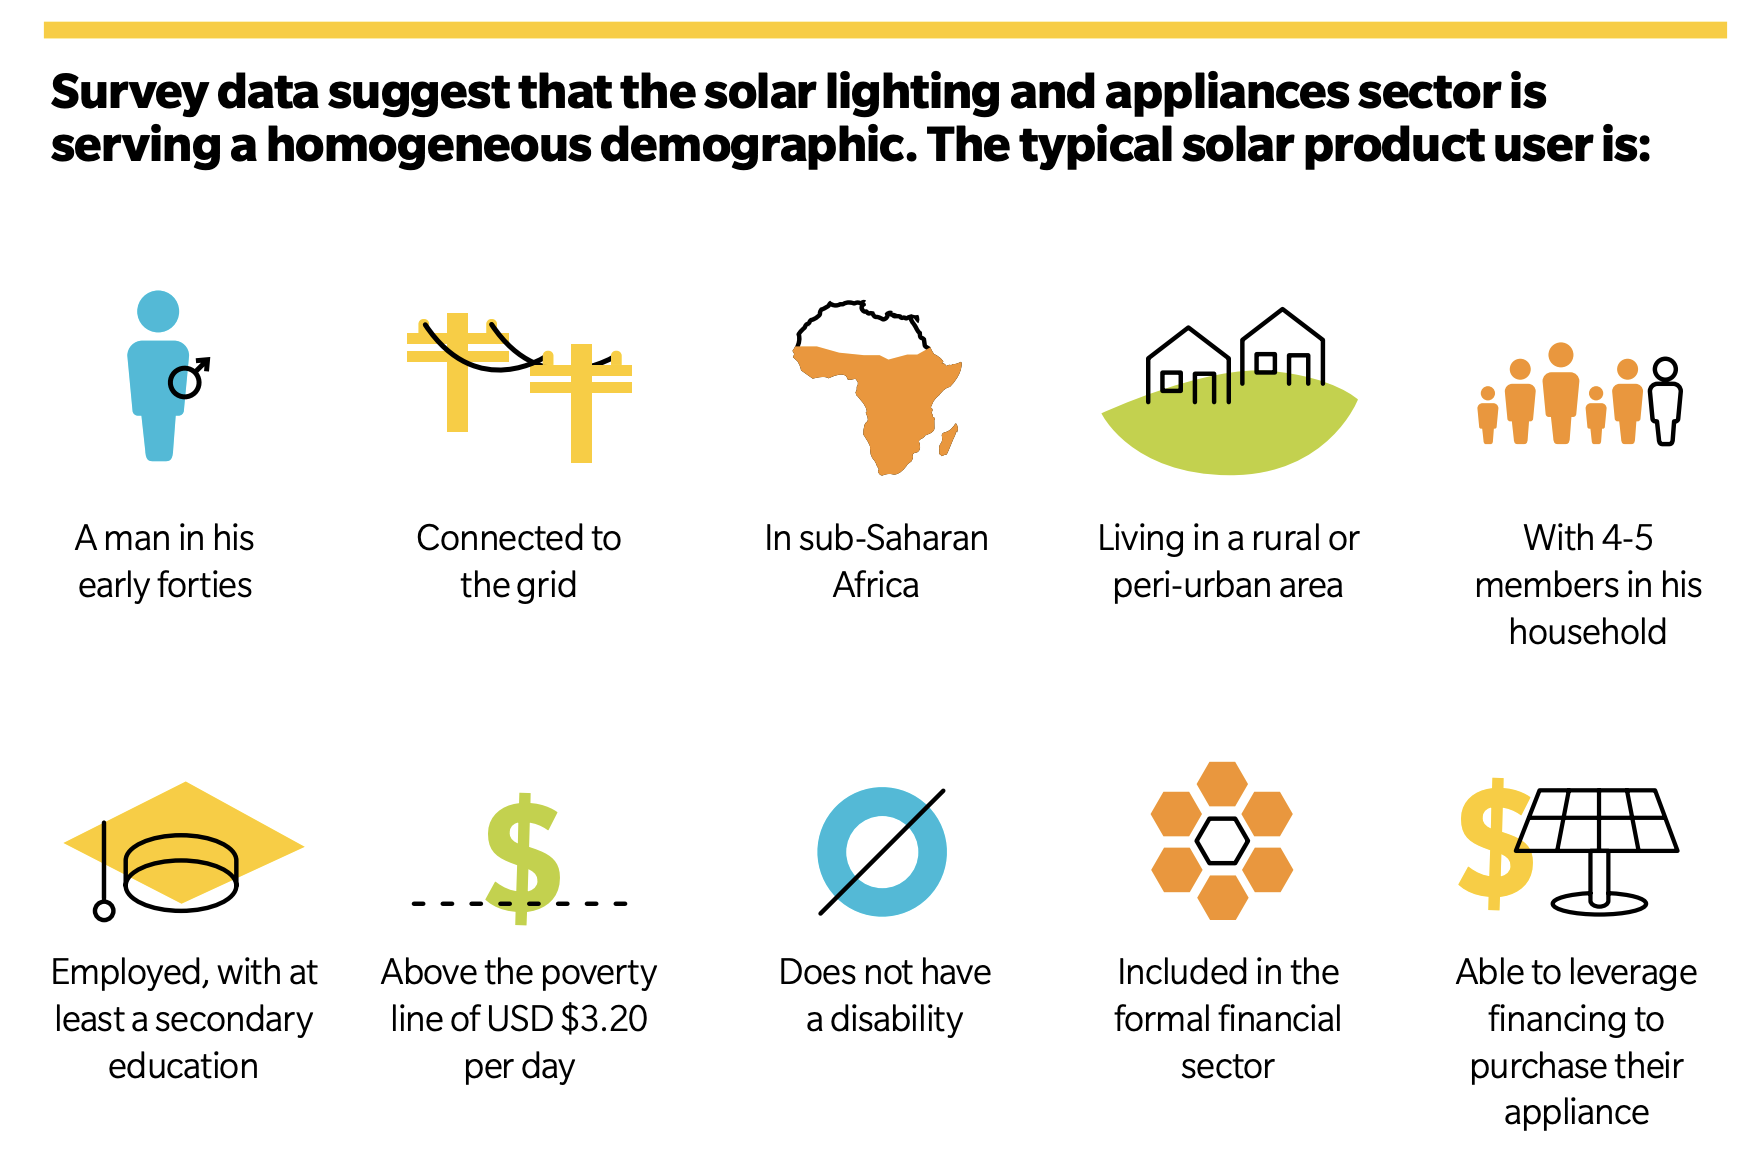 Black text in bold at the top: "Survey data suggest that the solar lighting and appliances sector is serving a homogenous demographic. The typical solar product user is:"Two rows of 5 icons in each and brief captions for each one. Row 1. 1: Blue person silhouette with male symbol. "A man in his early forties". 2: Two yellow electrical towers with black wires. "Connected to the grid" 3: Black outline of the continent of Africa. The bottom two-thirds are filled in orange. "In sub-Saharan Africa" 4: Black outline of two houses on a solid green hill. "Living in a rural or peri-urban area" 5: Five orange people silhouettes of varying heights and sizes followed by one black outline of a person's silhouette. "With 4-5 members in his household". Row 2. 1: Yellow graduation mortar with black outline. "Employed, with at least a secondary education". 2: Green dollar sign with a black dashed line running across the bottom of the dollar sign. "Above the poverty line of USD $3.20 per day". 3. Blue ring with a black line running diagonally across it. "Does not have a disability". 4. Six solid orange hexagons encircling a black outlined hexagon. "Included in the formal financial sector". 5. Black outline of a solar panel with a solid yellow dollar sign next to it. "Able to leverage financing to purchase their appliance".